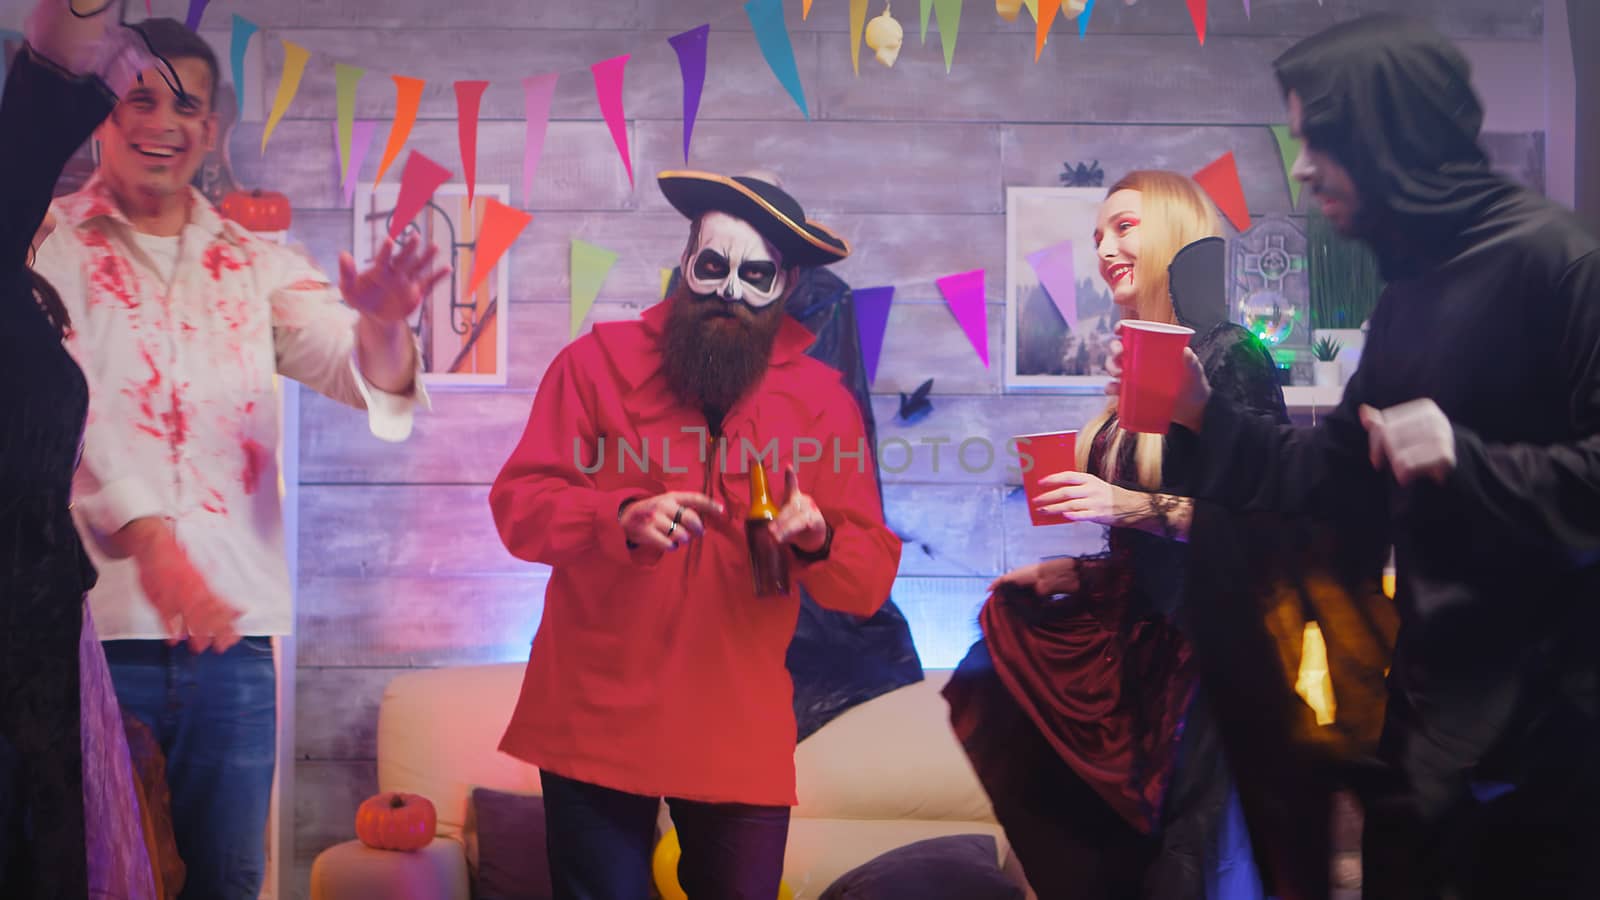 Man dressed up like a pirate dancing with people dressed up like different monsters at halloween party.